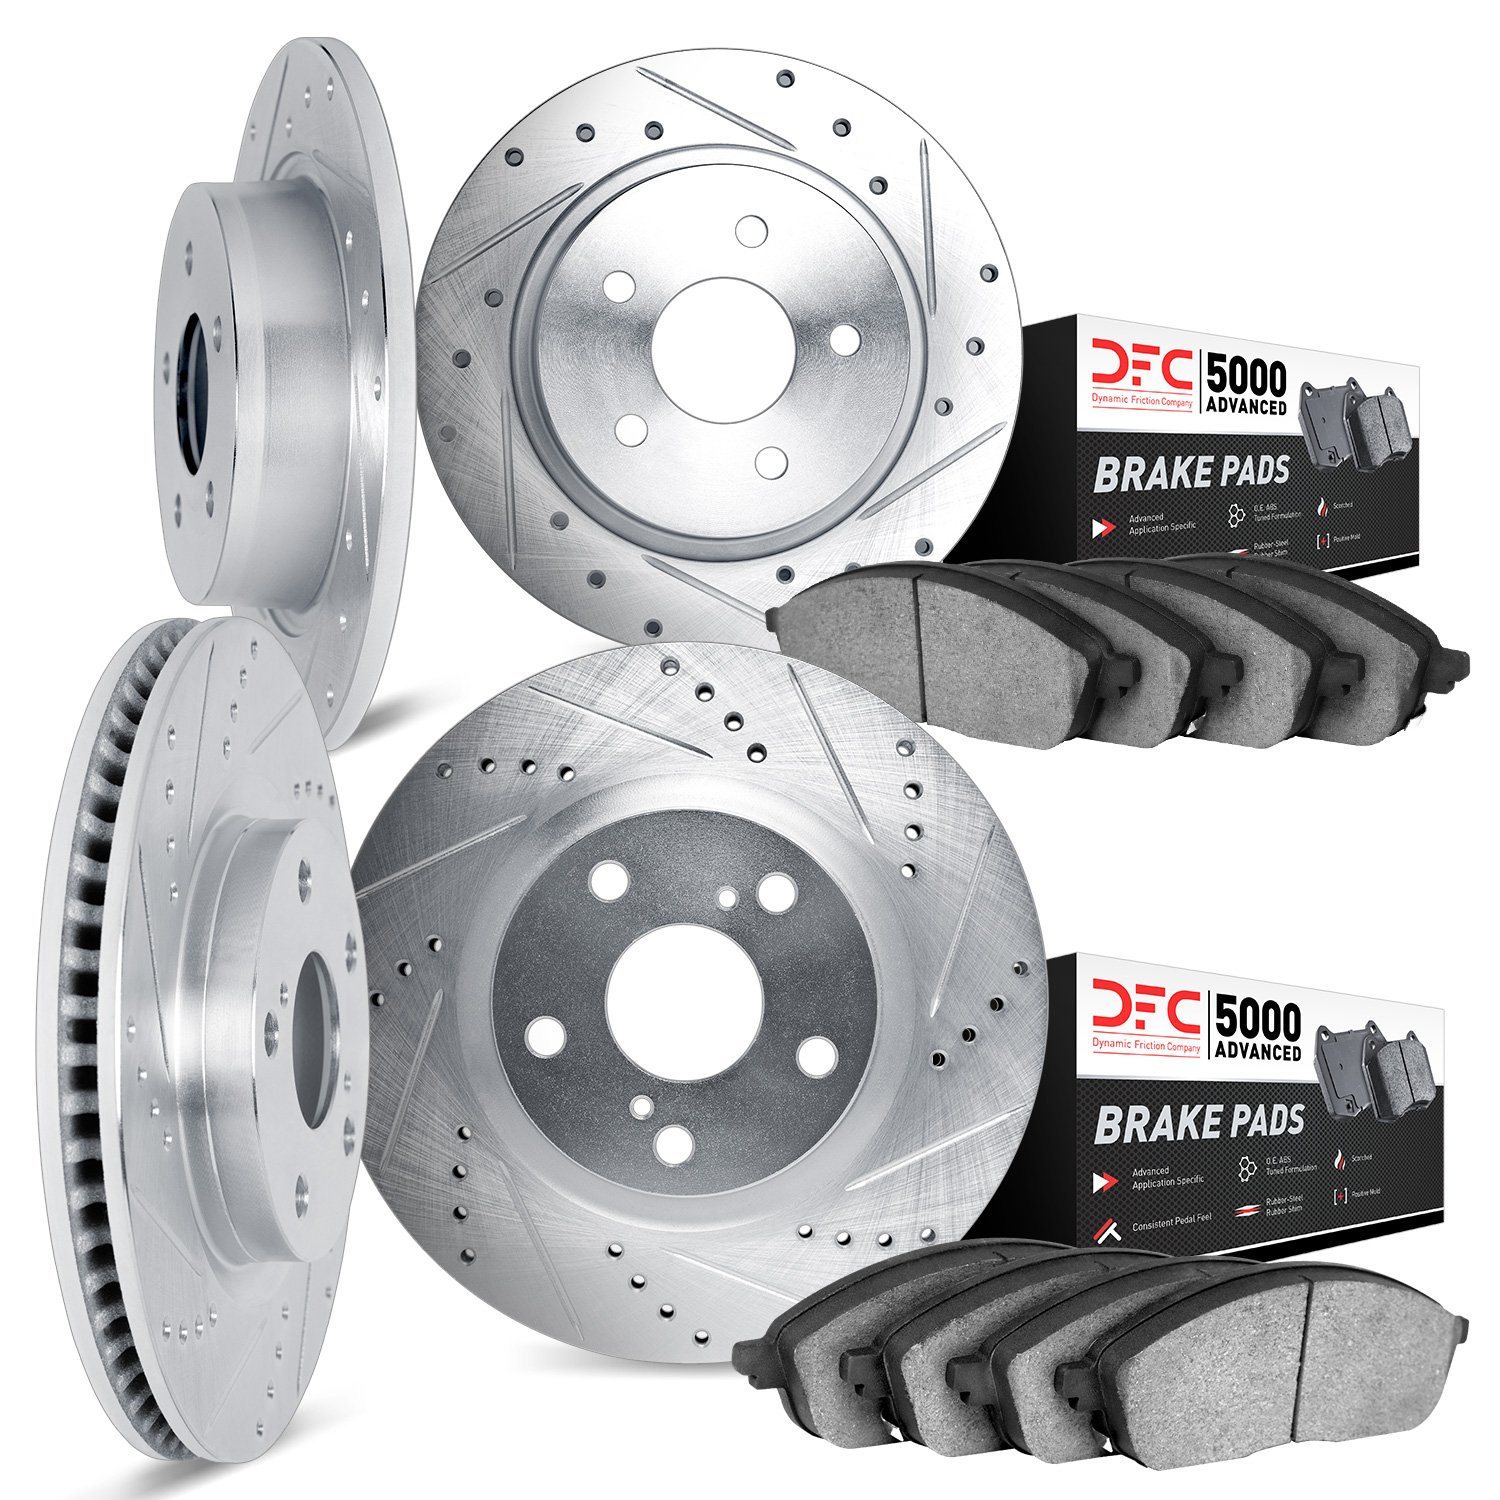 7504-13013 Drilled/Slotted Brake Rotors w/5000 Advanced Brake Pads Kit [Silver], Fits Select Subaru, Position: Front and Rear